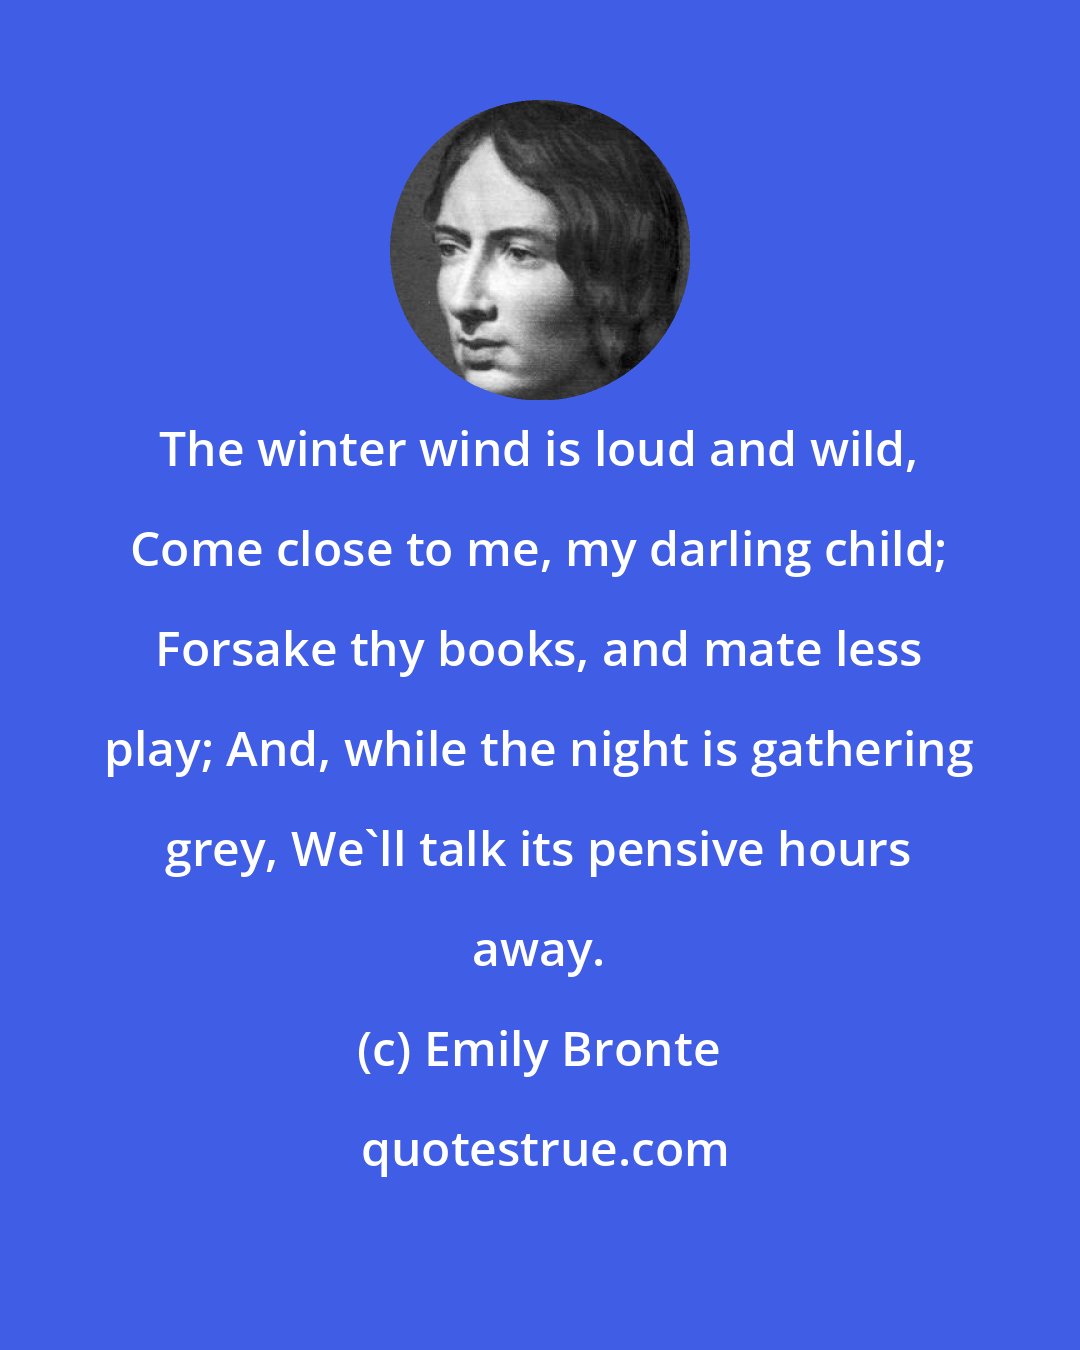 Emily Bronte: The winter wind is loud and wild, Come close to me, my darling child; Forsake thy books, and mate less play; And, while the night is gathering grey, We'll talk its pensive hours away.